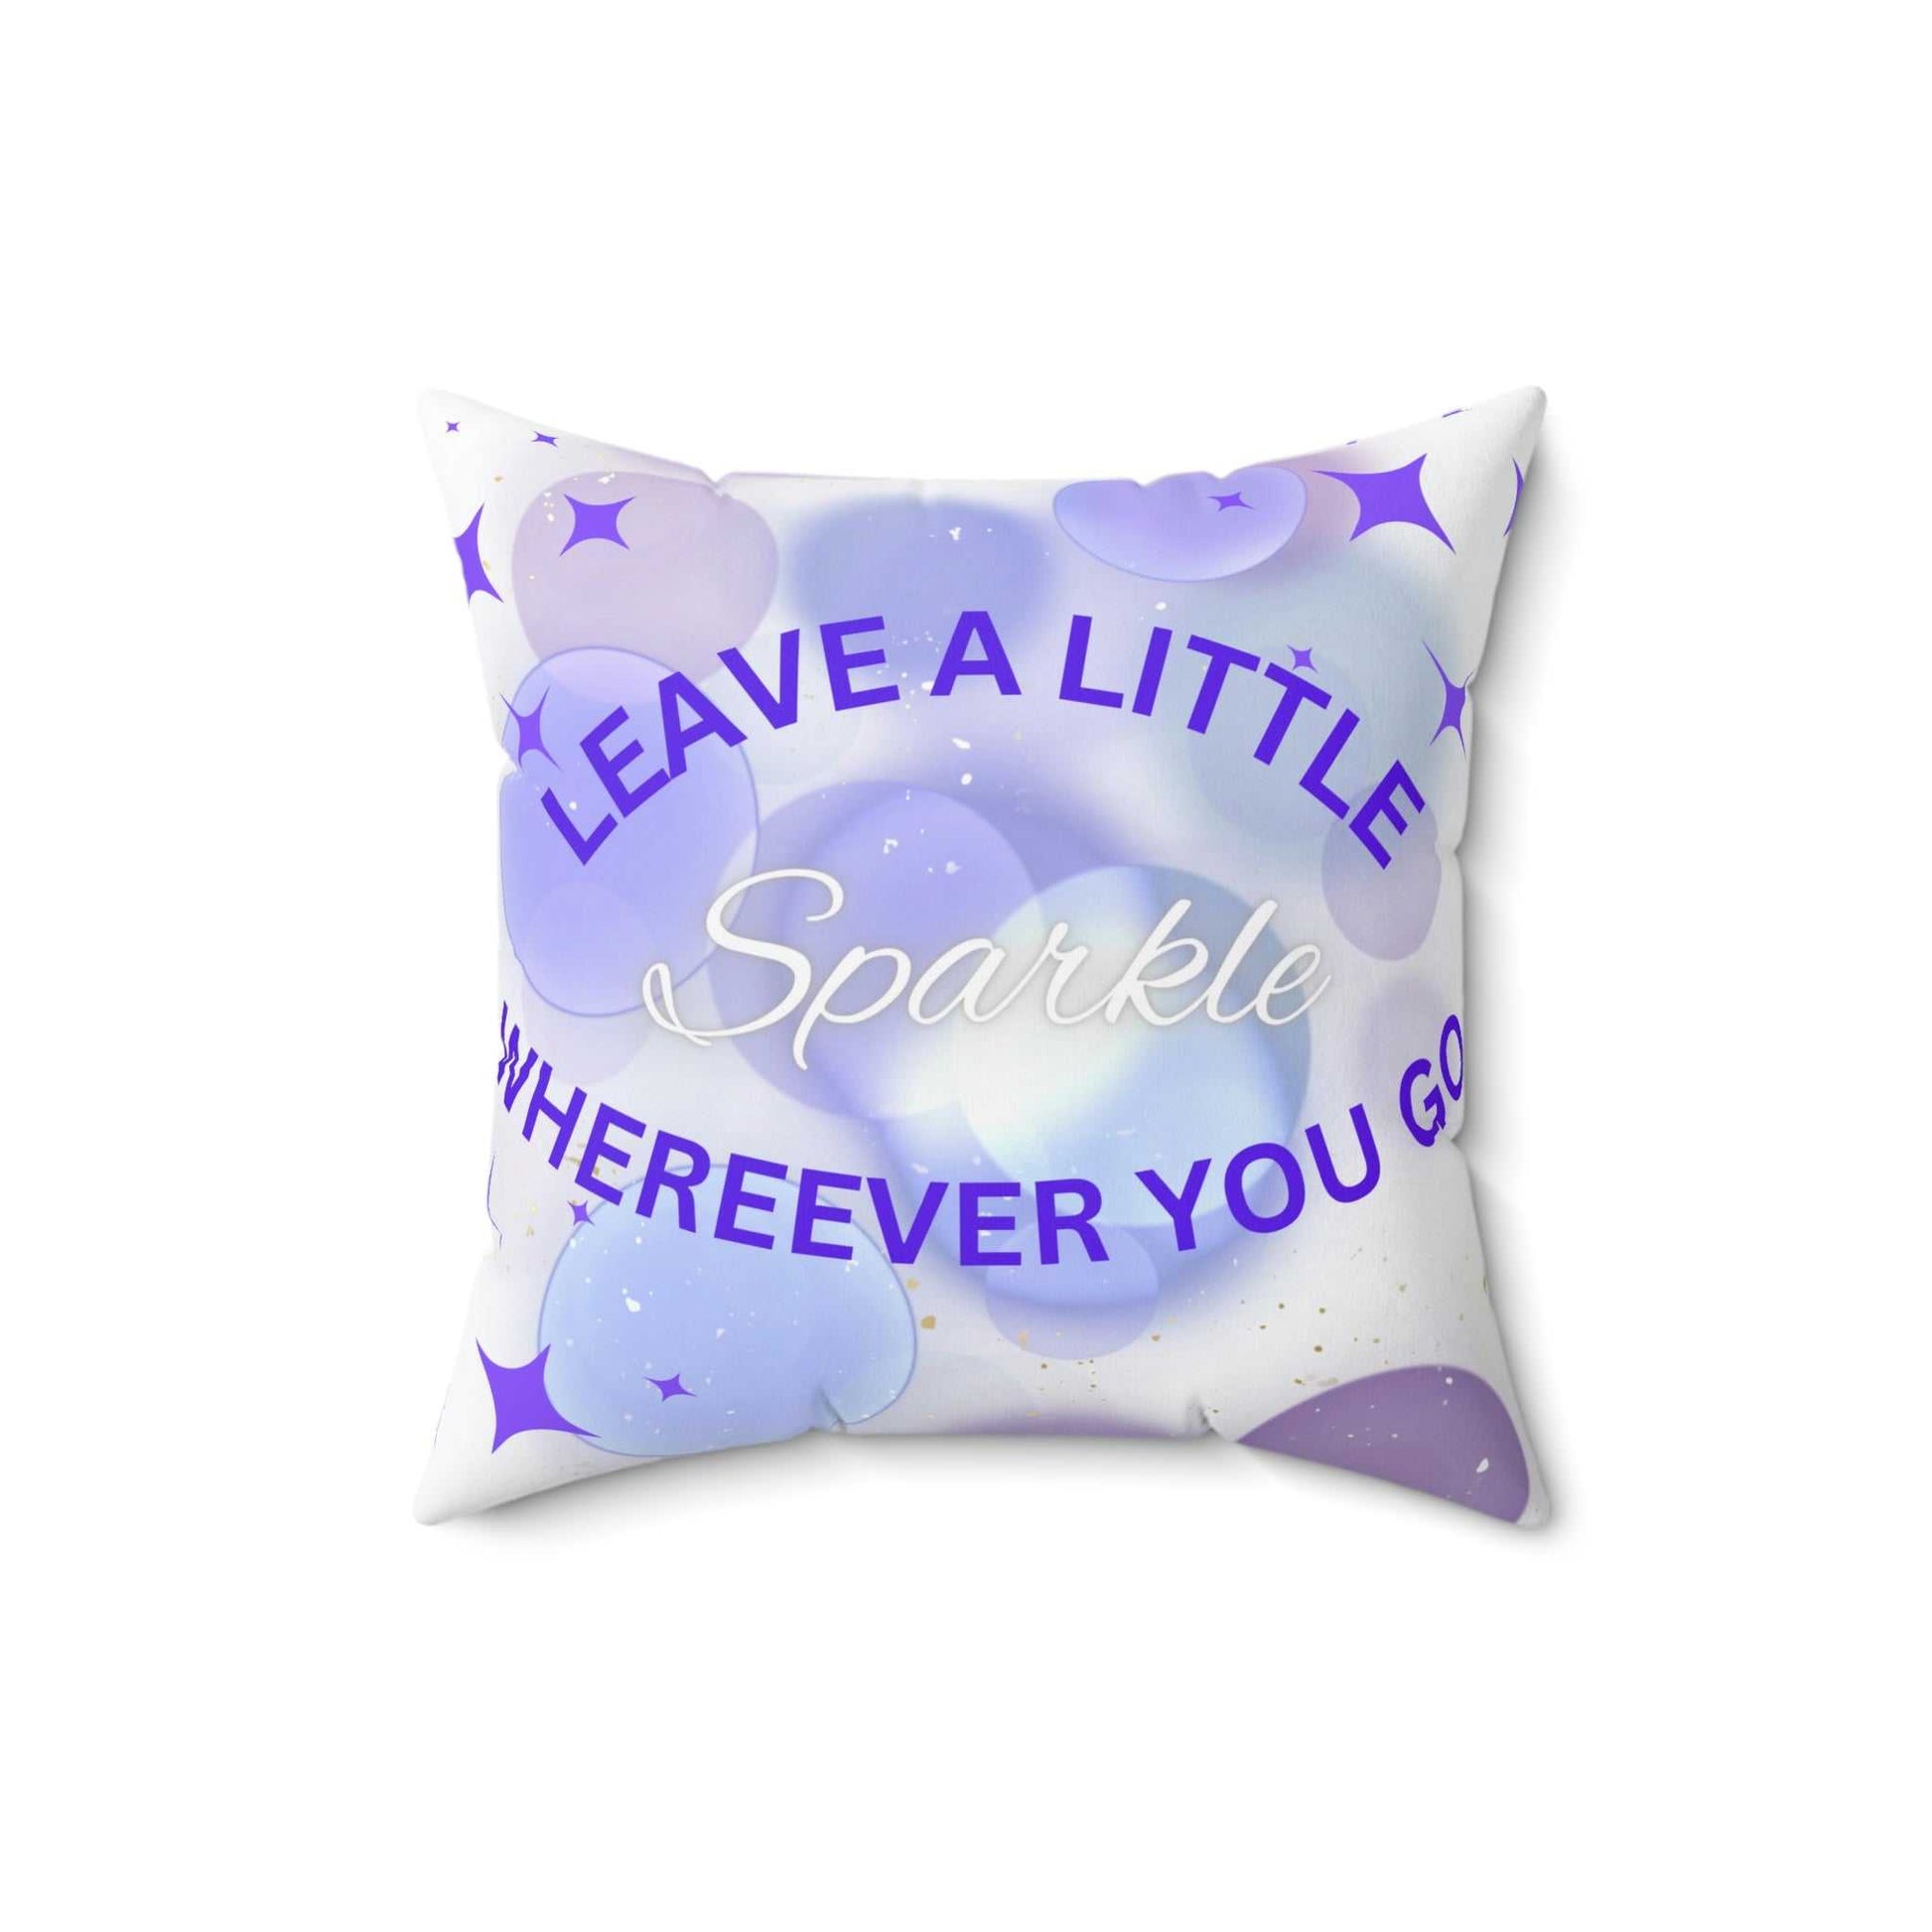 Leave a Little Sparkle Spun Polyester Square Pillow Motivation on the Go!! Home Decor Good Vibes Daily Lab 26